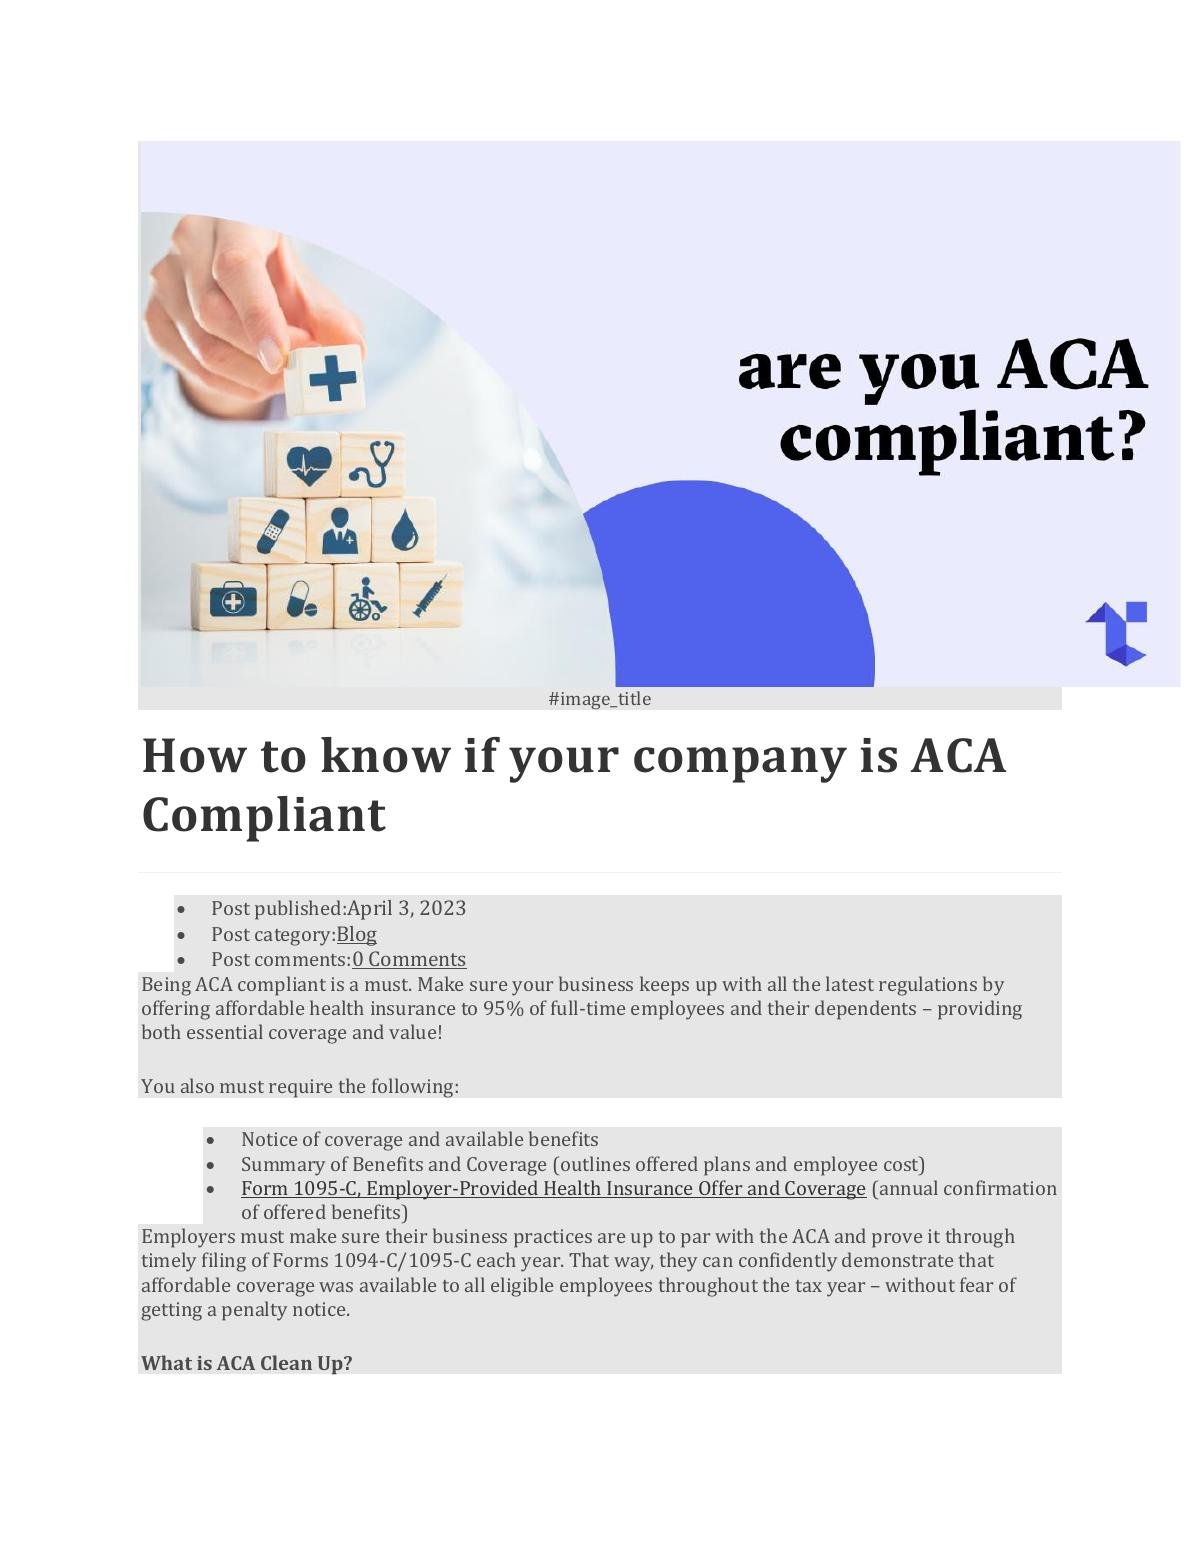 How to know if your company is ACA Compliant